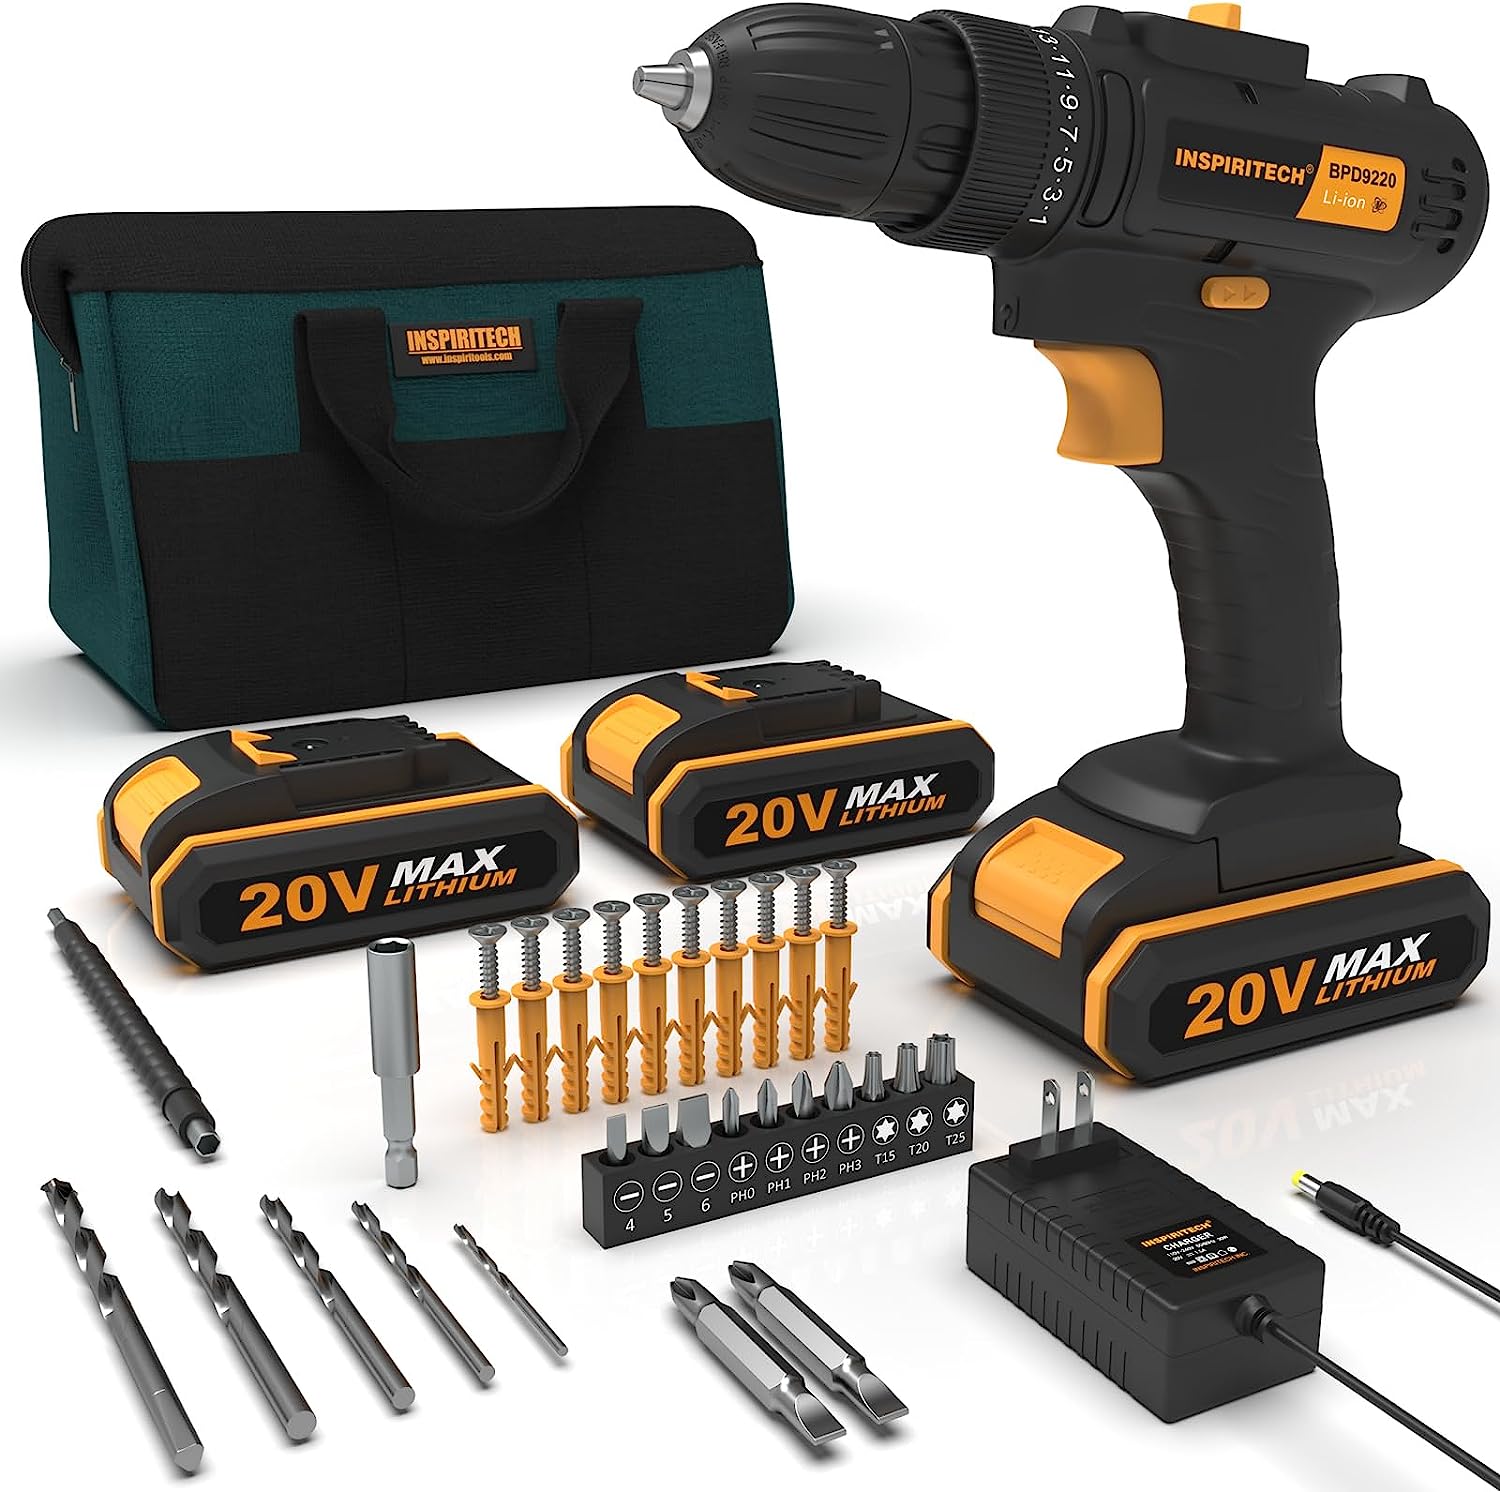 INSPIRITECH 20V Cordless Drill with 2 Batteries, [...]